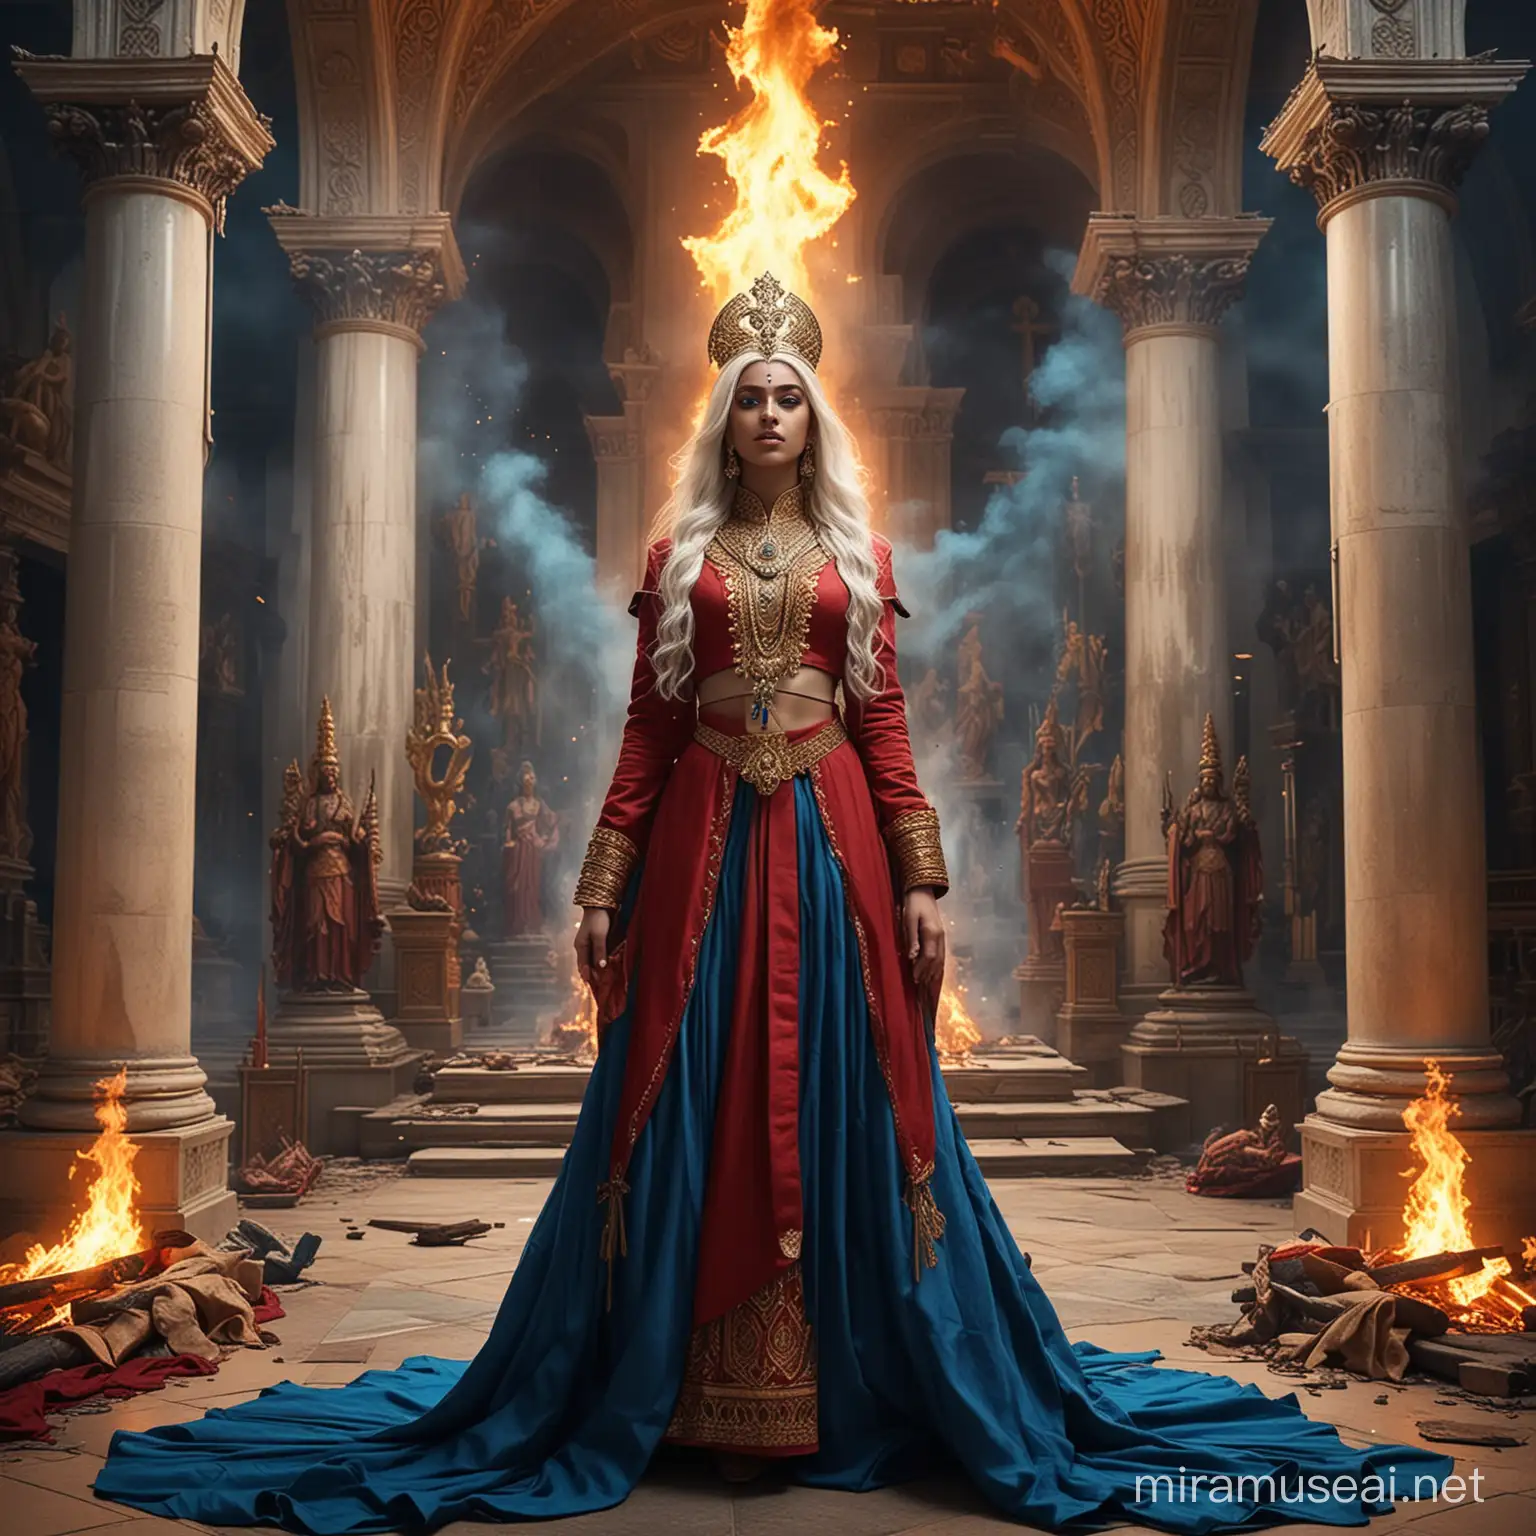 Goddess Empress in Mystical Hindu Attack Stance Surrounded by Cosmic Energy